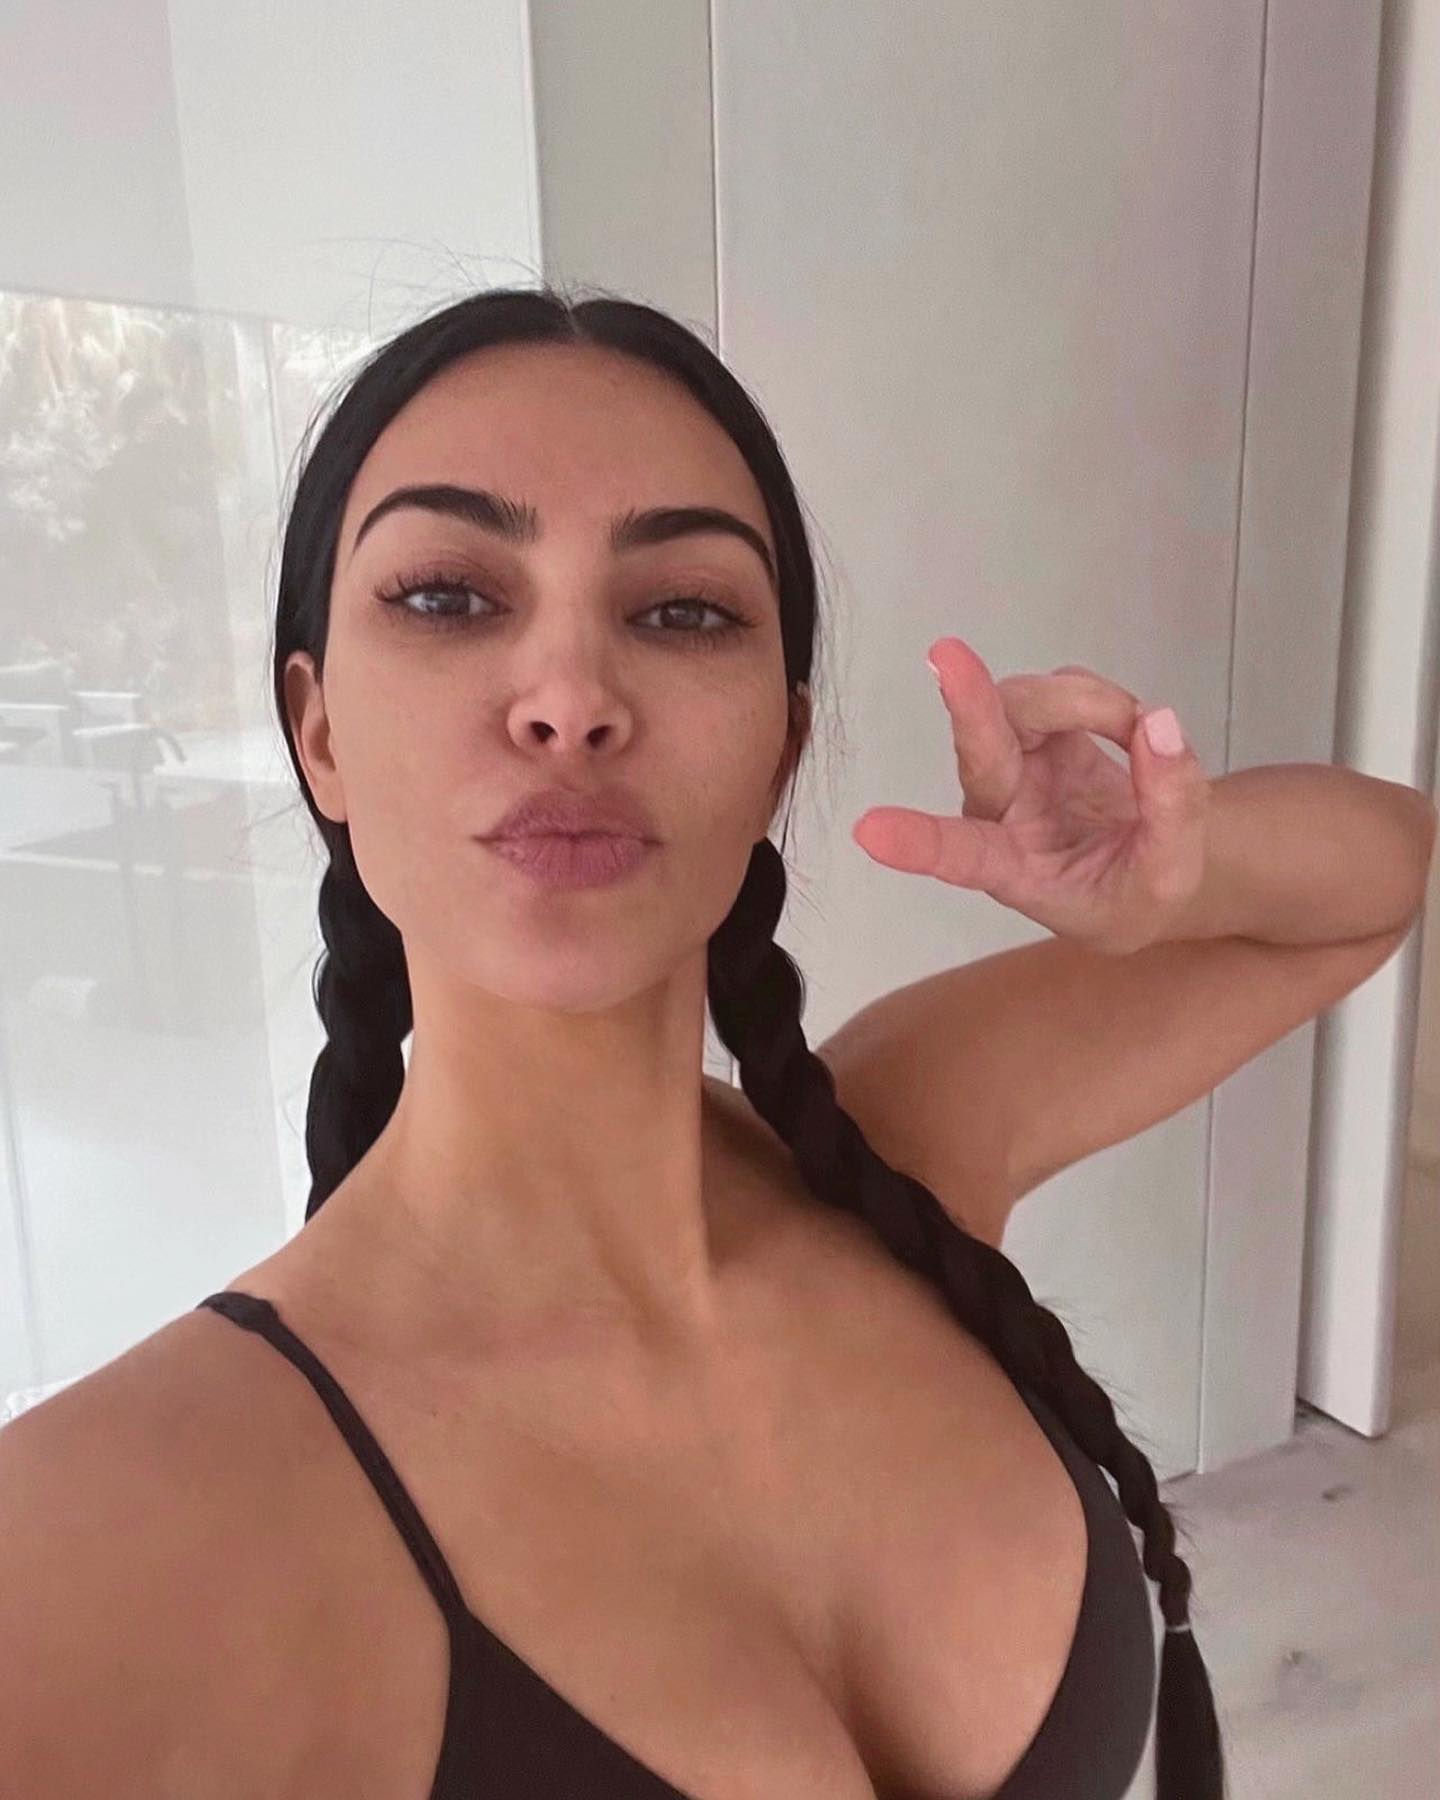 Exclusive!! Kim Kardashian looks hot with little or no makeup as